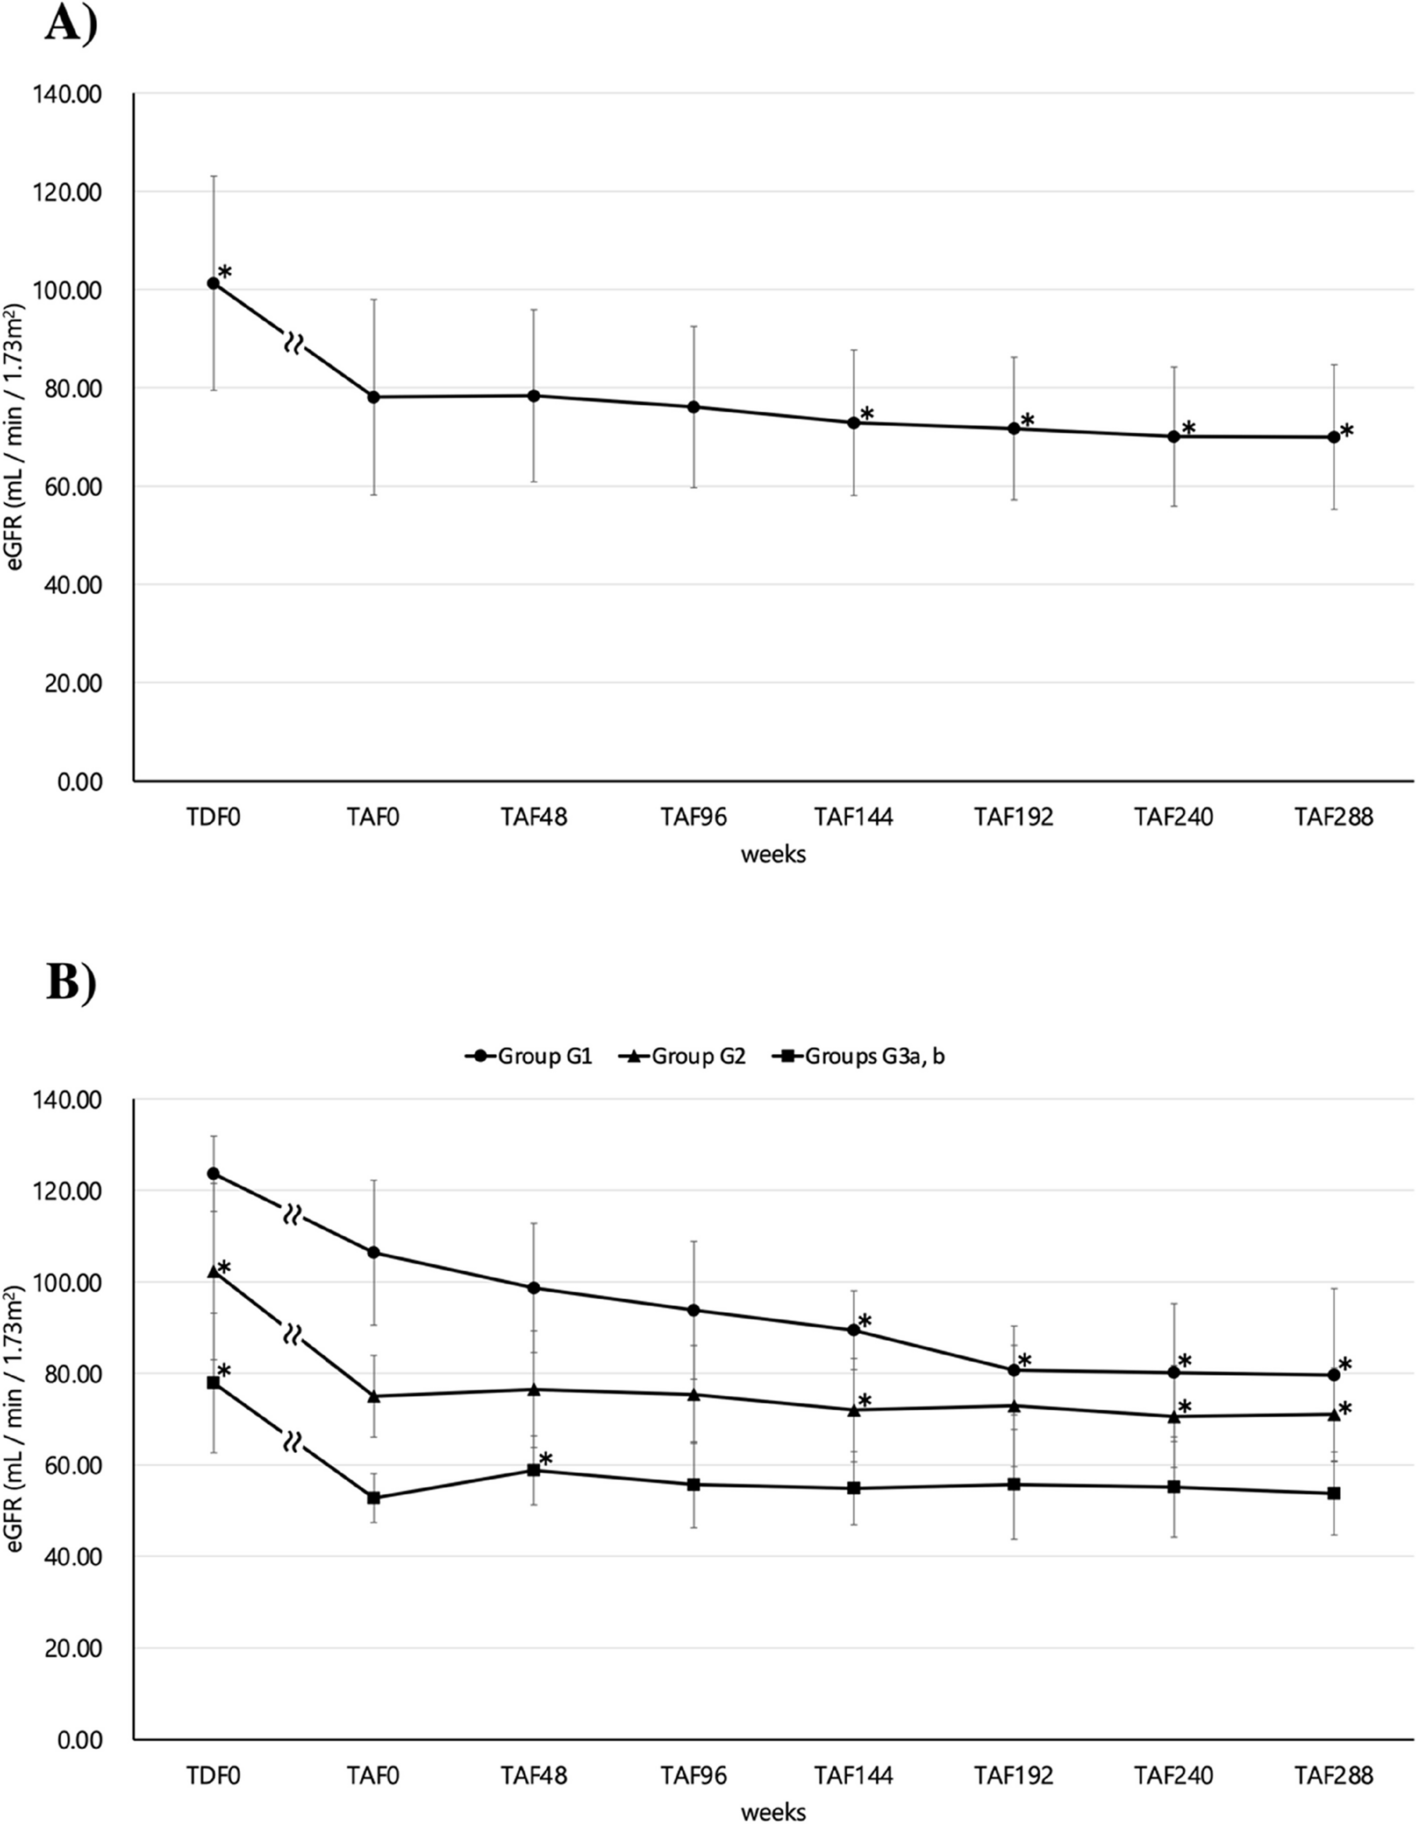 Renal function and lipid metabolism in Japanese HIV-1-positive individuals 288 weeks after switching from tenofovir disoproxil fumarate to tenofovir alafenamide fumarate: a single-center, retrospective cohort study